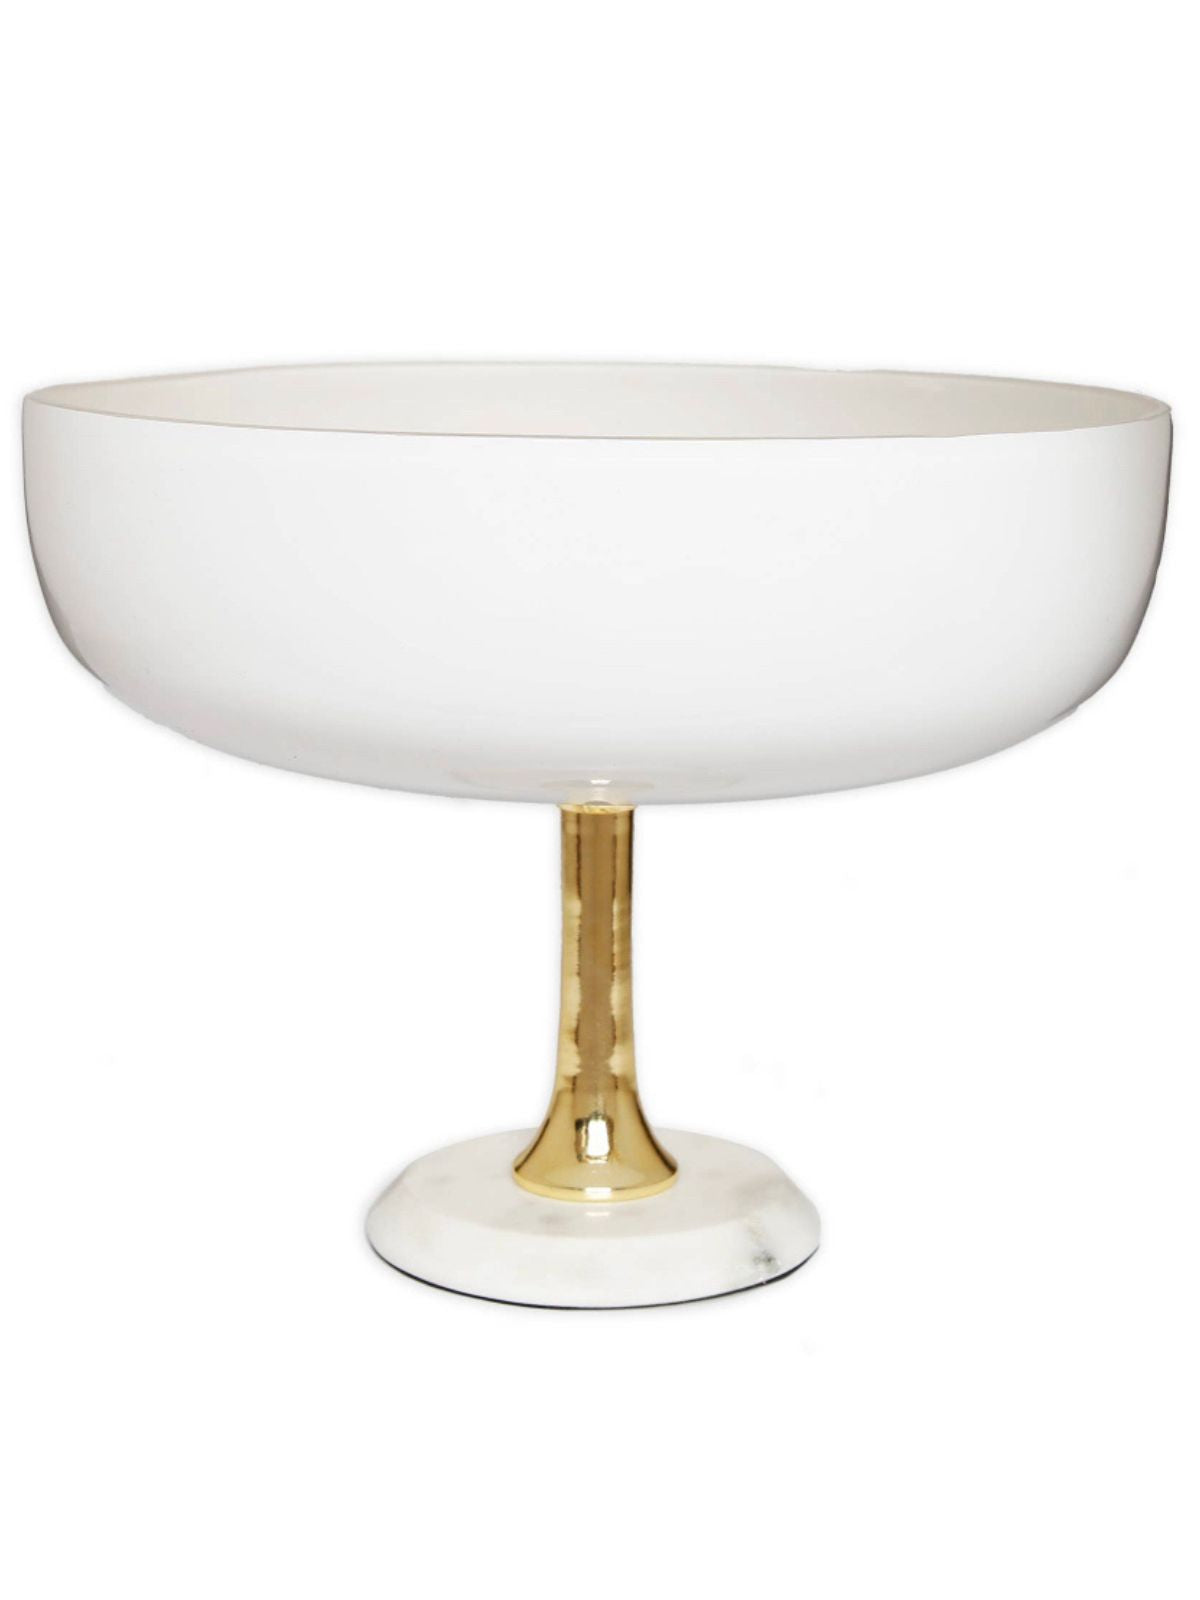 Luxury white glass decorative bowl with a lustrous gold stem sitting on sturdy marble base, 11.75D x 7H. 